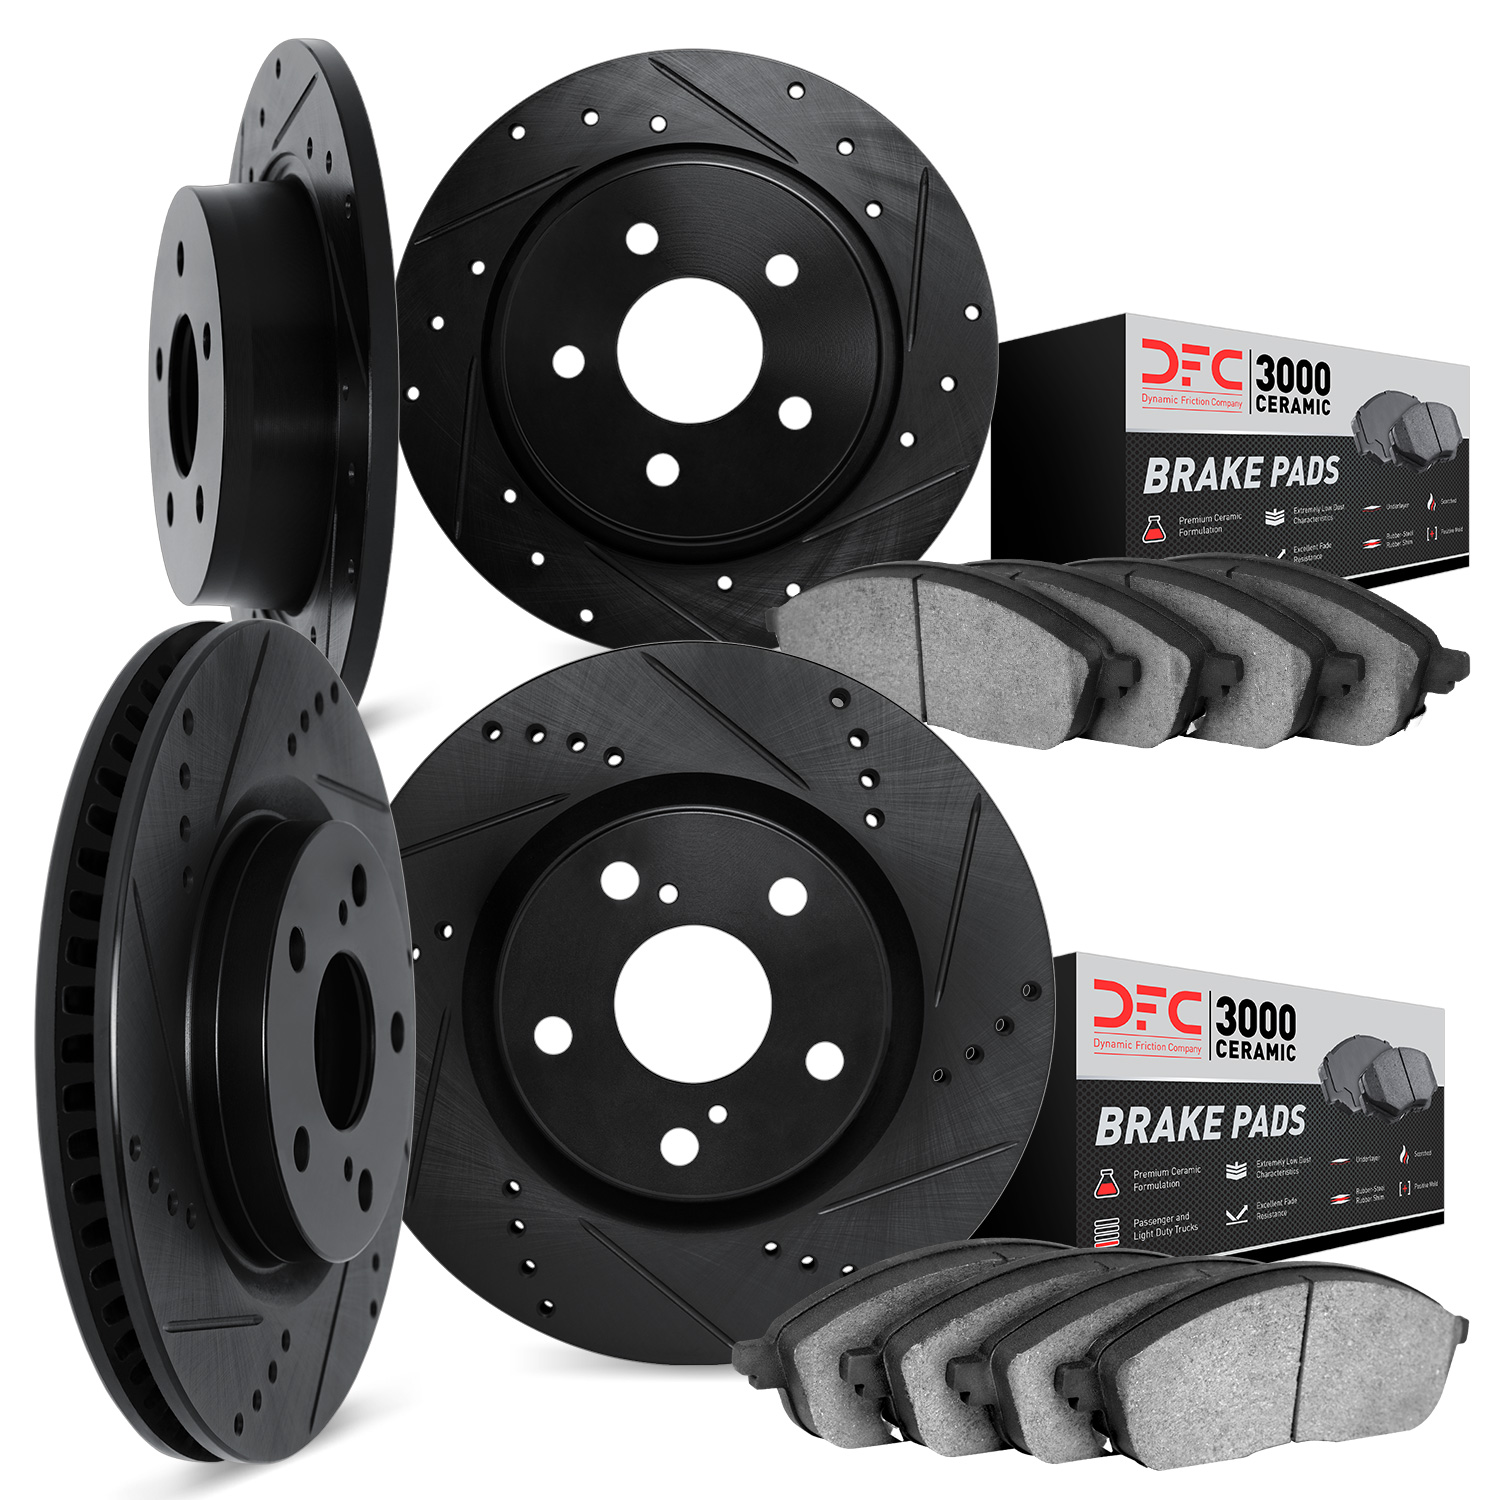 8304-58009 Drilled/Slotted Brake Rotors with 3000-Series Ceramic Brake Pads Kit [Black], 2004-2008 Acura/Honda, Position: Front